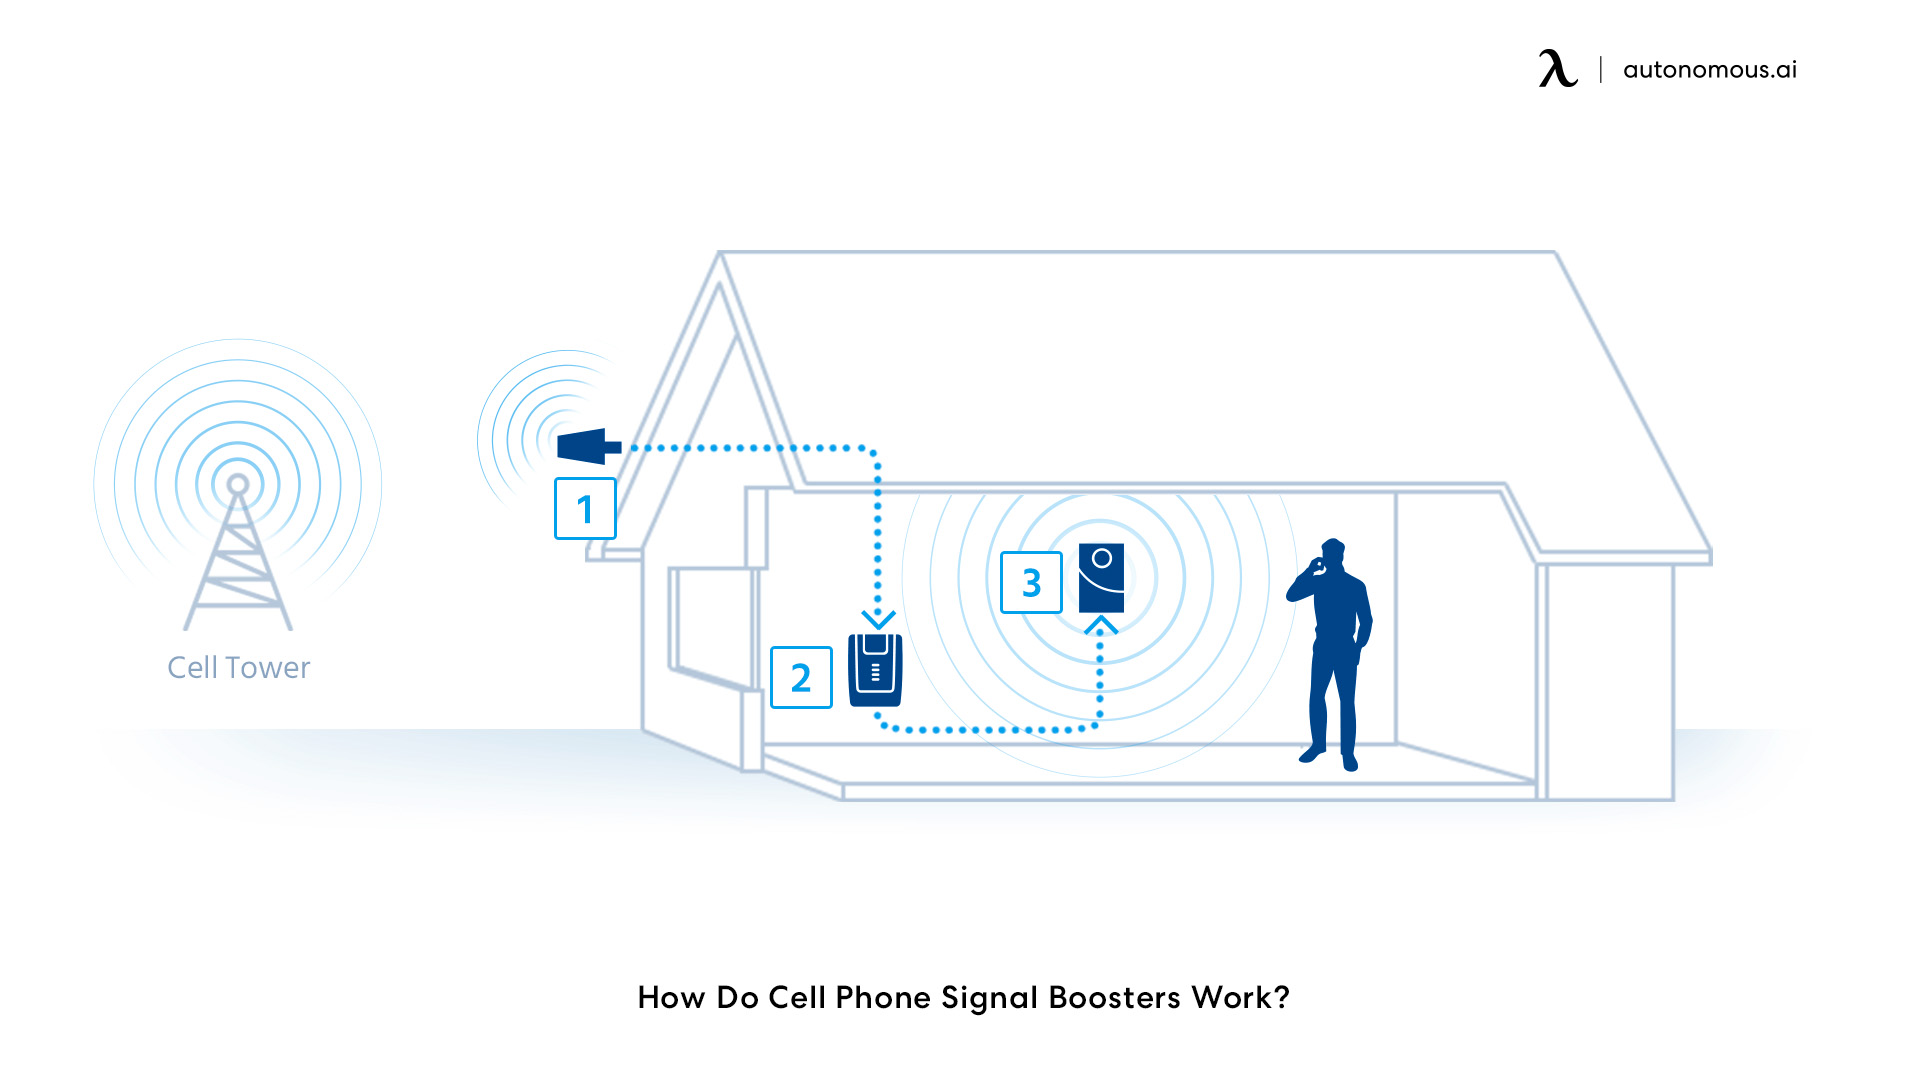 How Do Cell Phone Signal Boosters Work